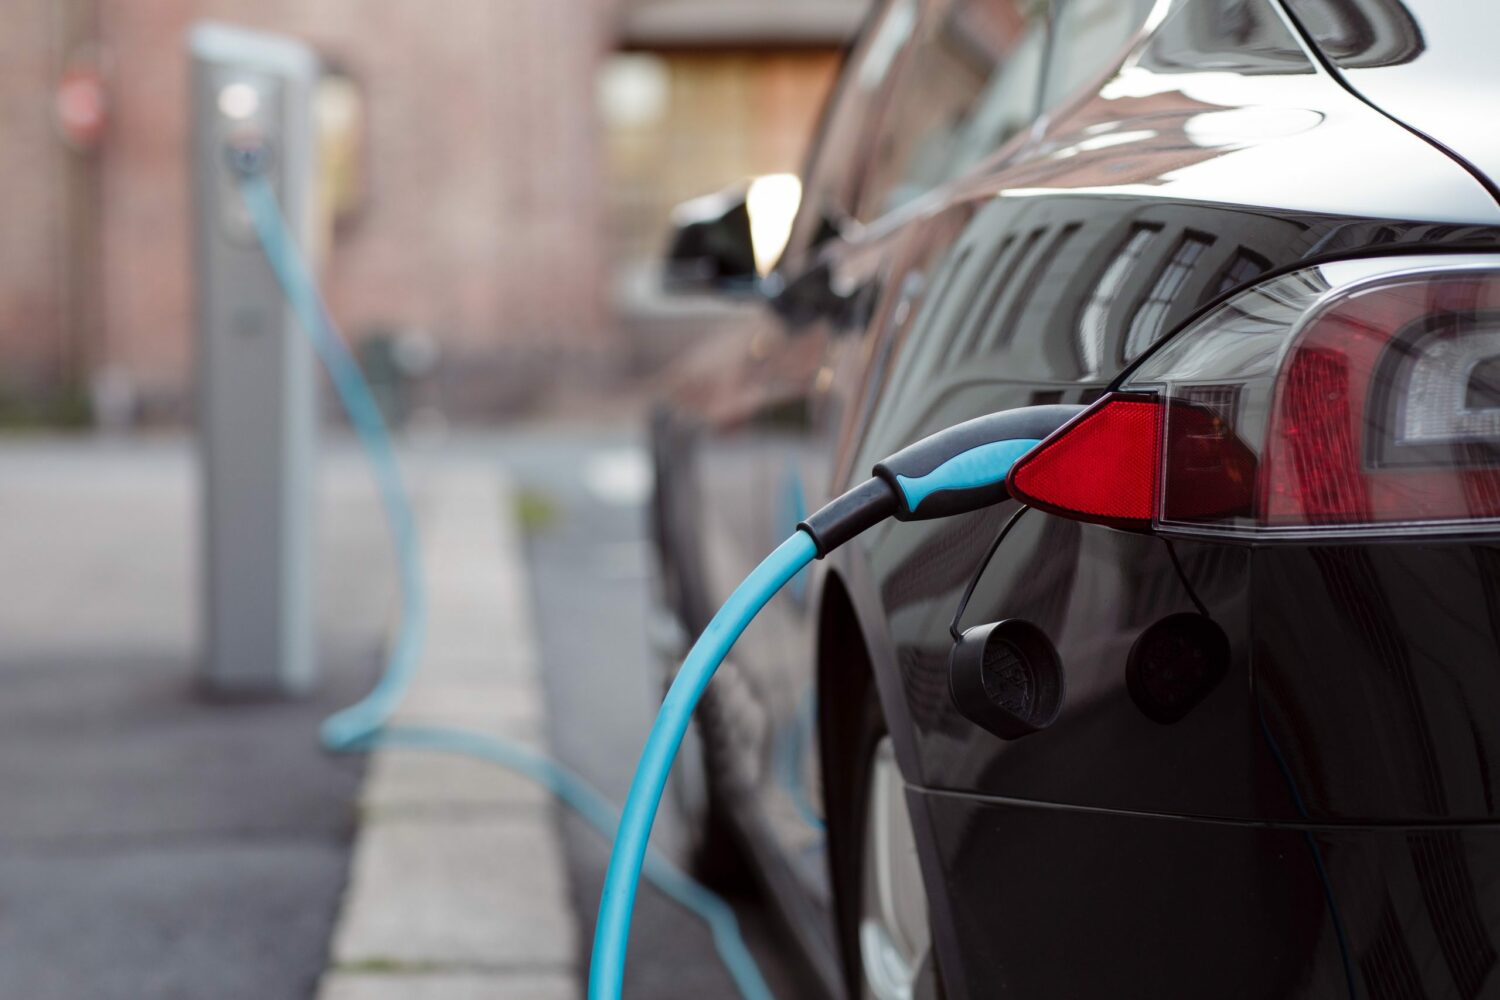 Texas will begin charging electric vehicle owners in the state $200 annually in September, just over a week away.